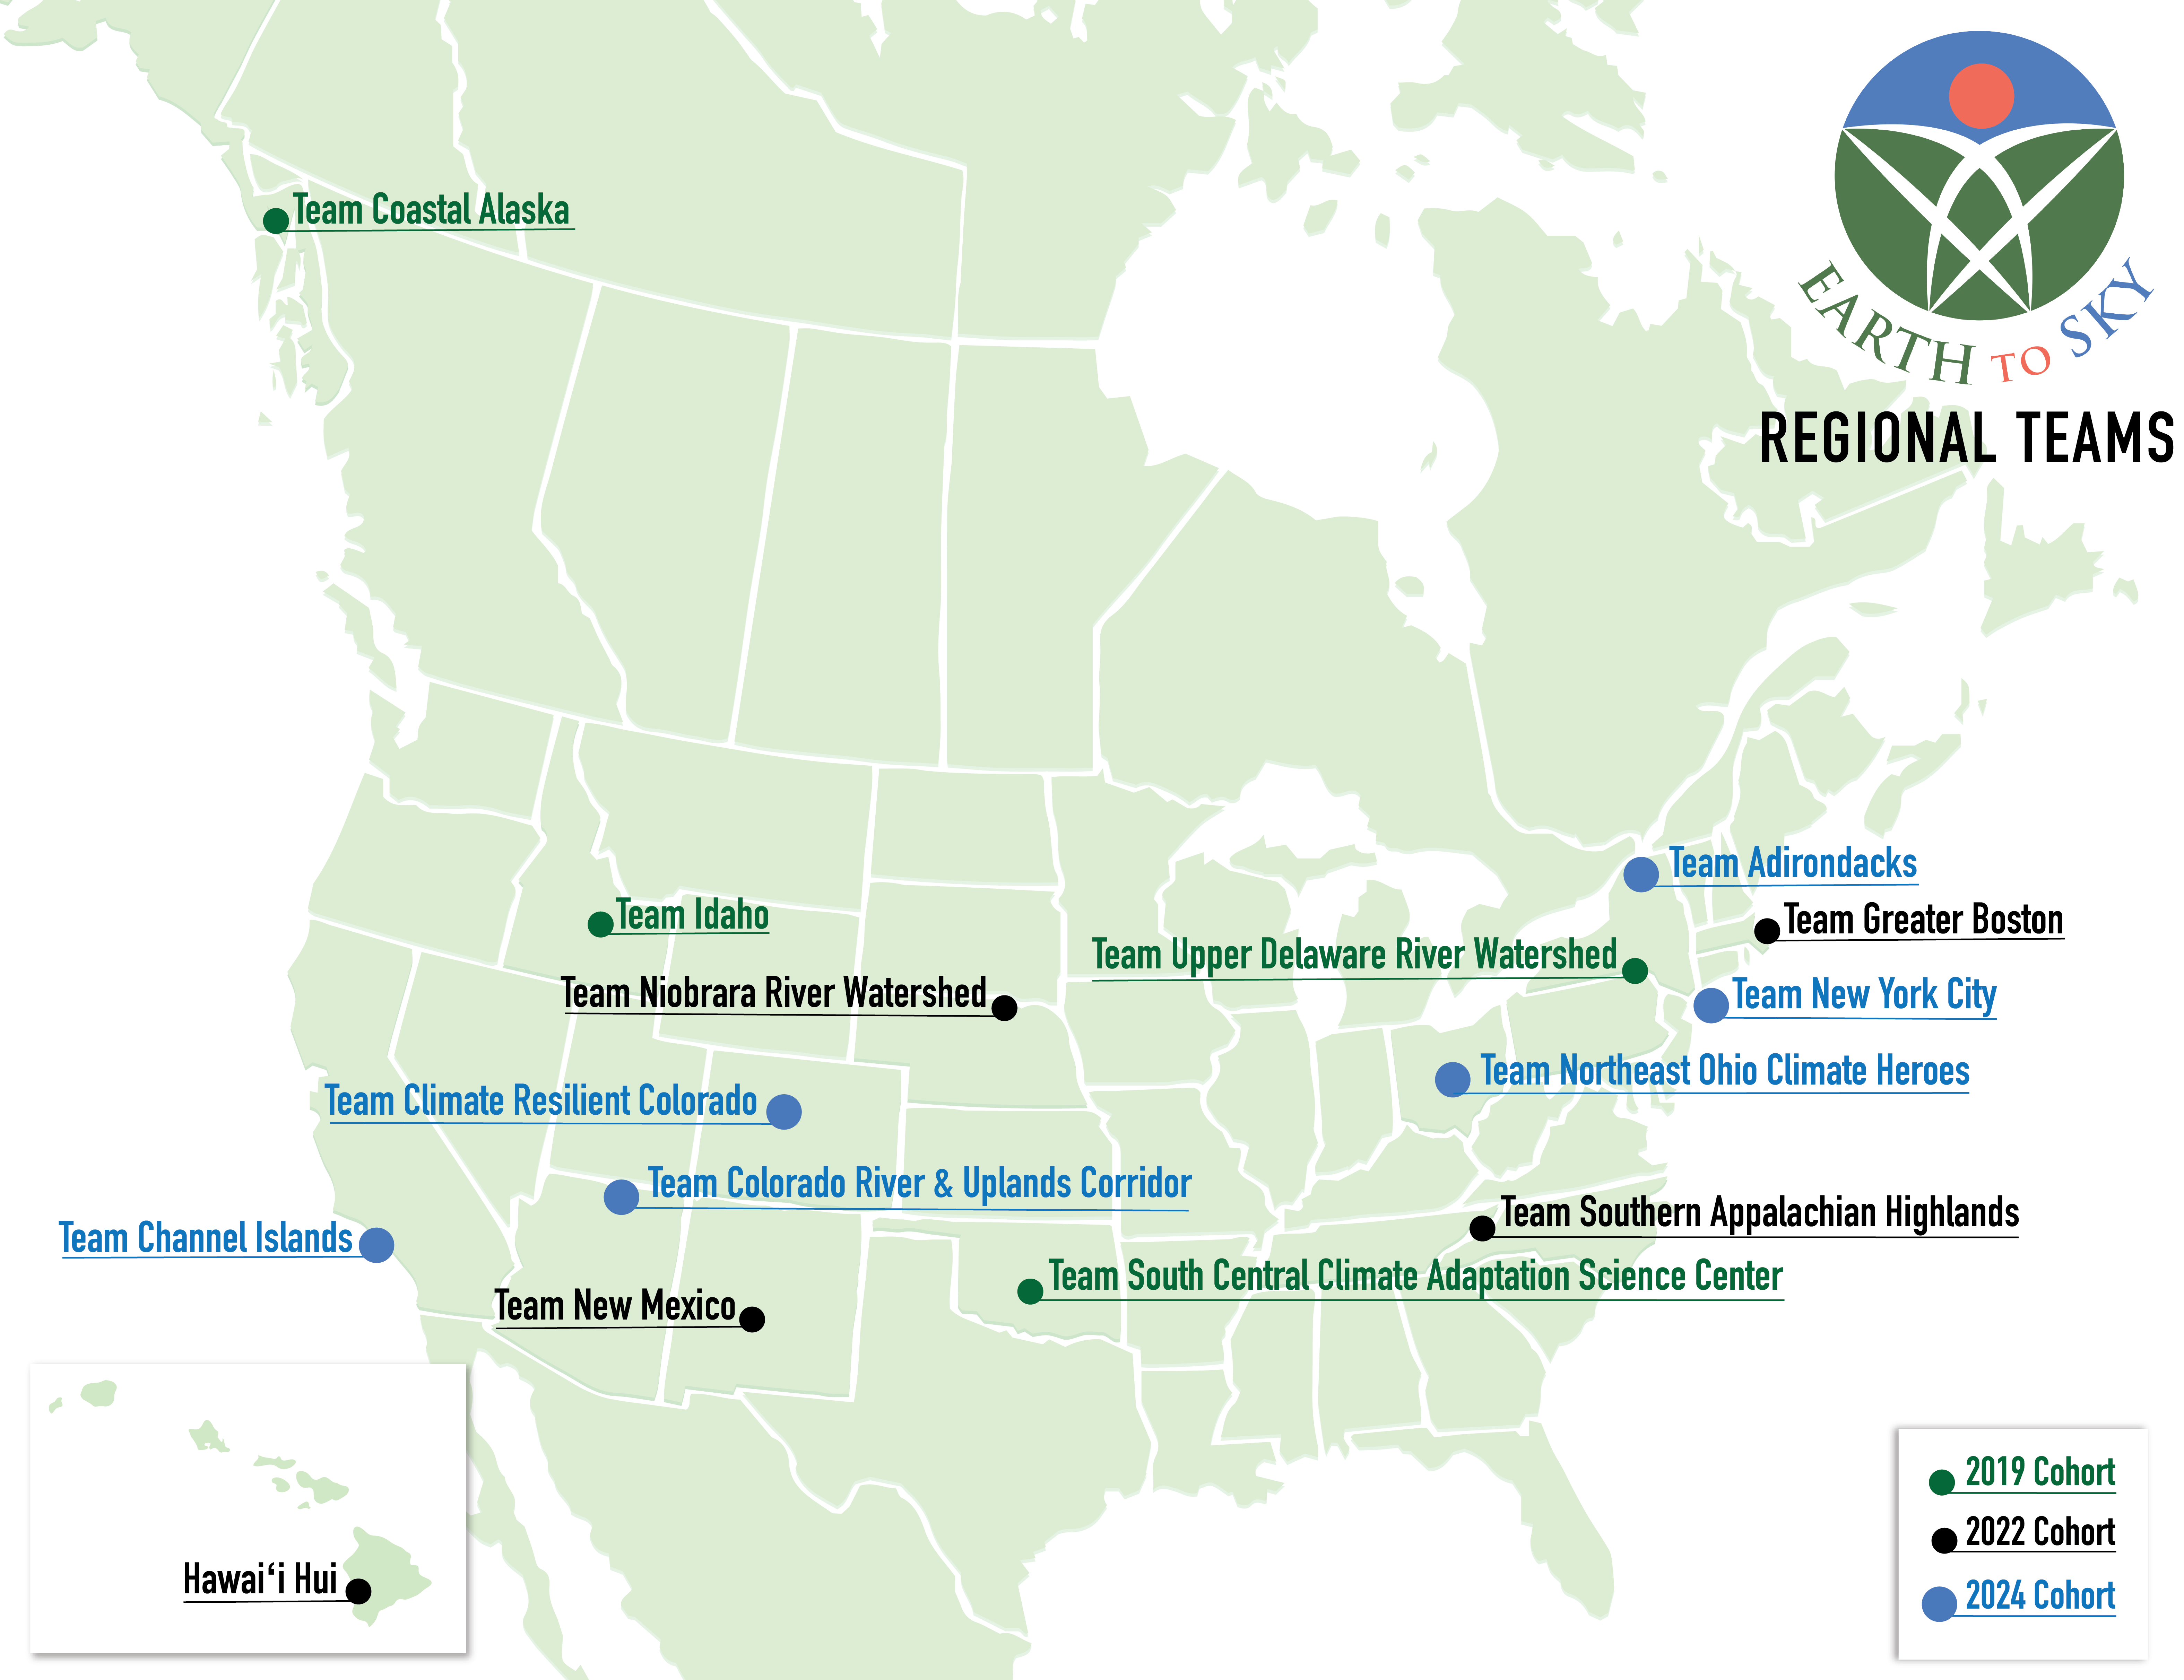 Map of North America showing the locations of fifteen regional teams from three cohorts: 2019, 2022, and 2024.